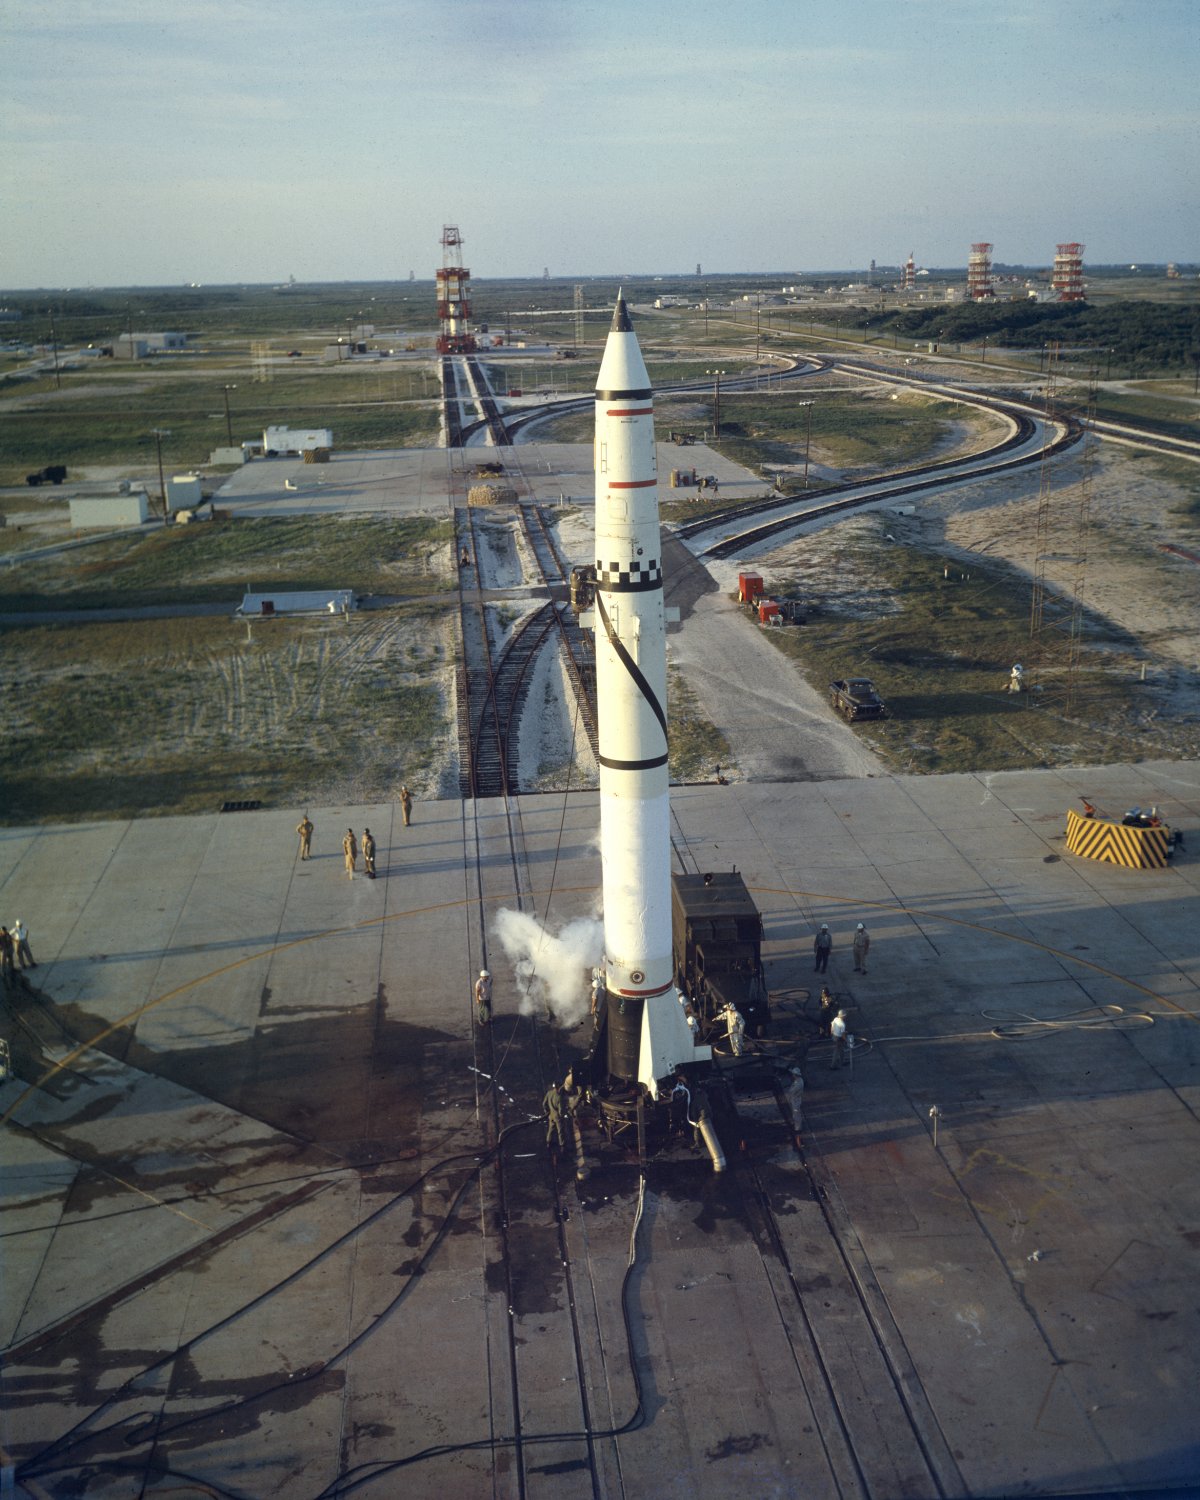 REDSTONE MISSILE NO. 1002 ON LAUNCH PAD AT CAPE CANAVERAL - 8X10 PHOTO ...